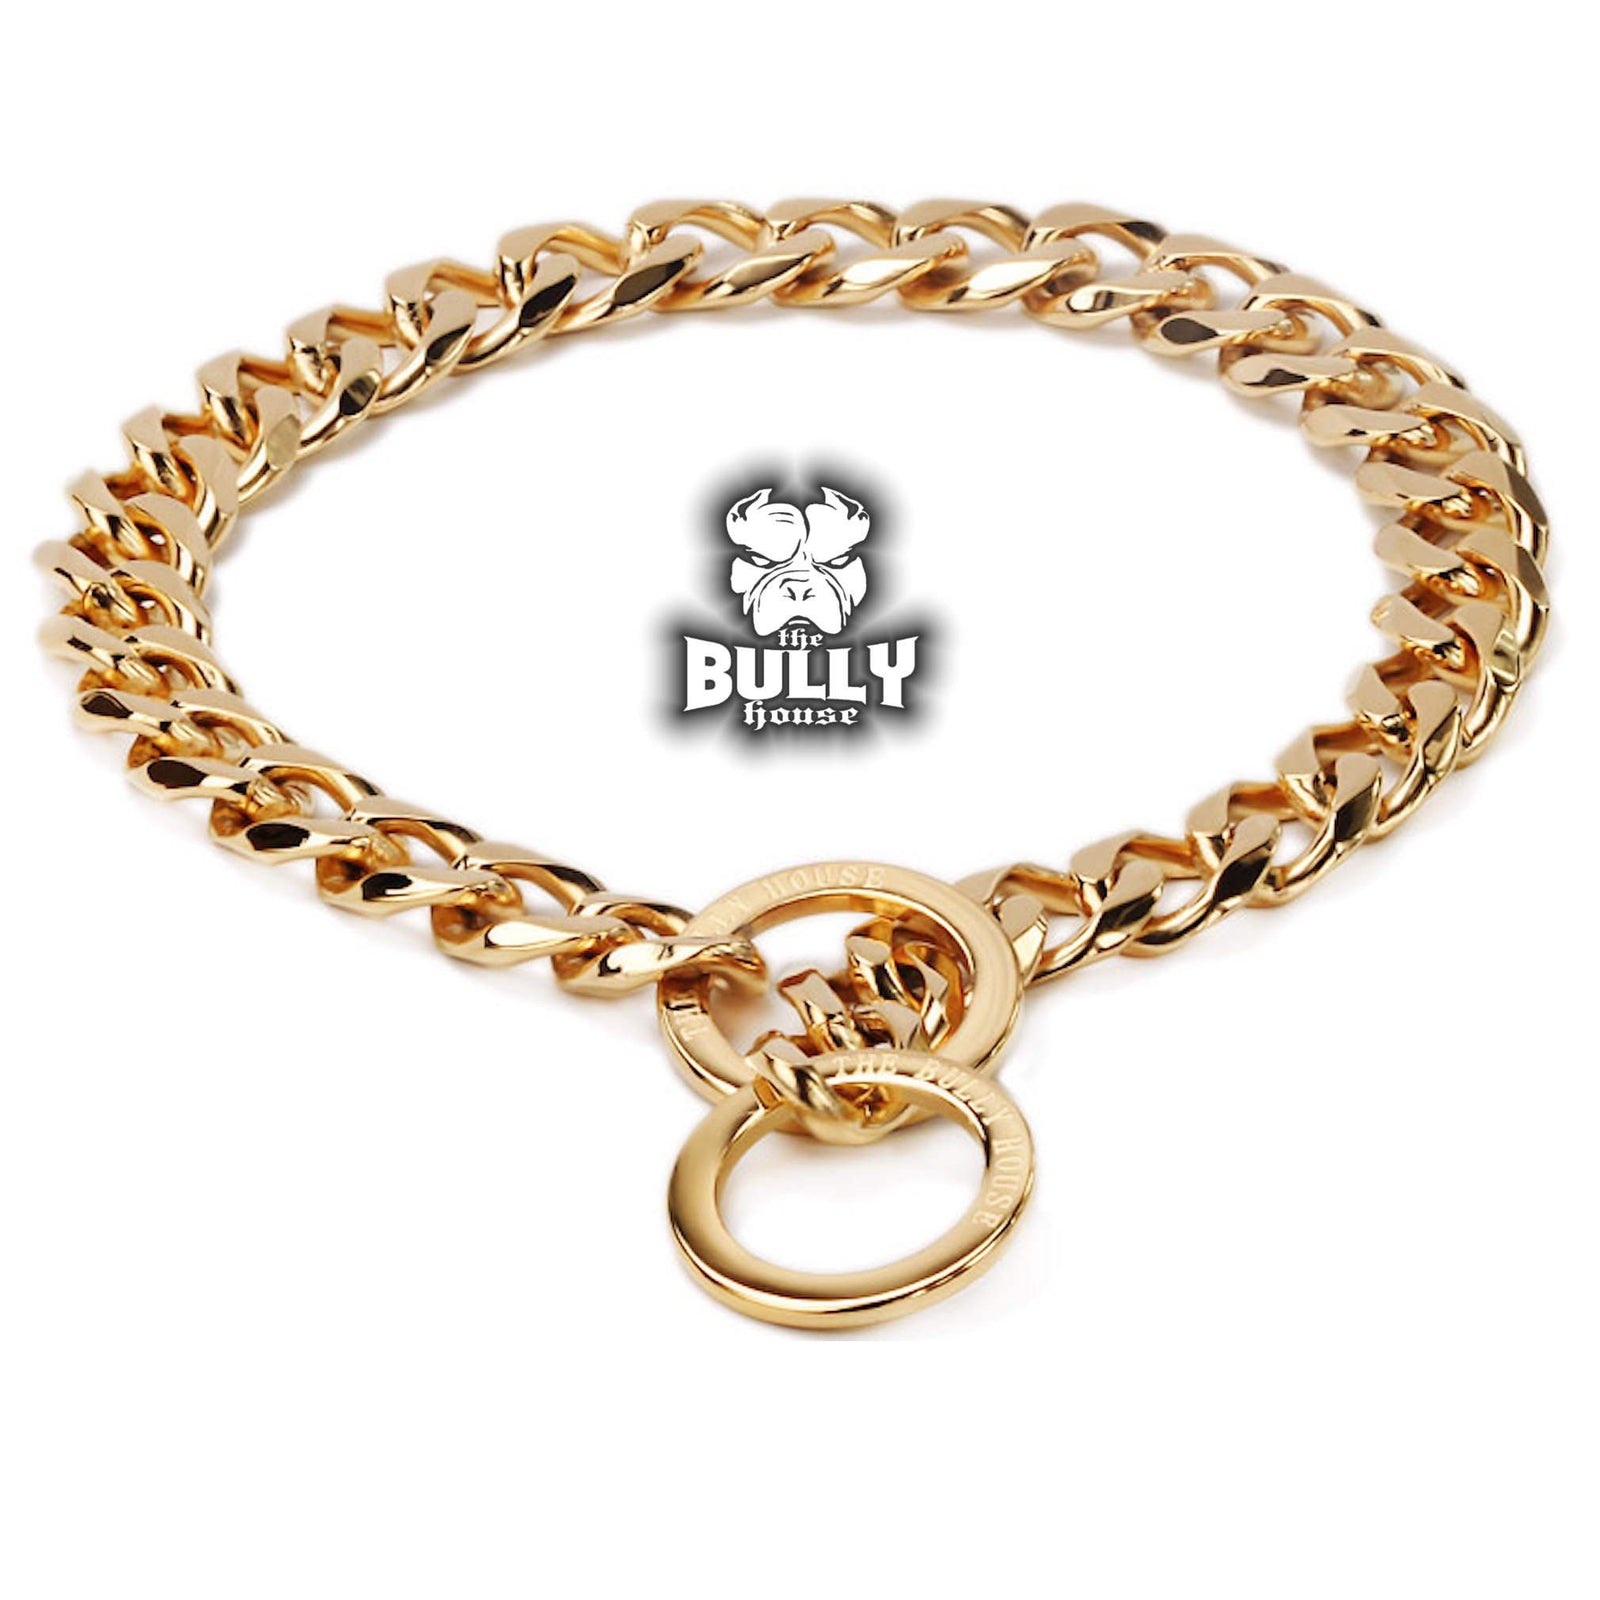 (Pre Order Now - Arriving approx end of DEC) The Bully House "CHECK CHAIN Collection" -  GOLD 20mm Wide